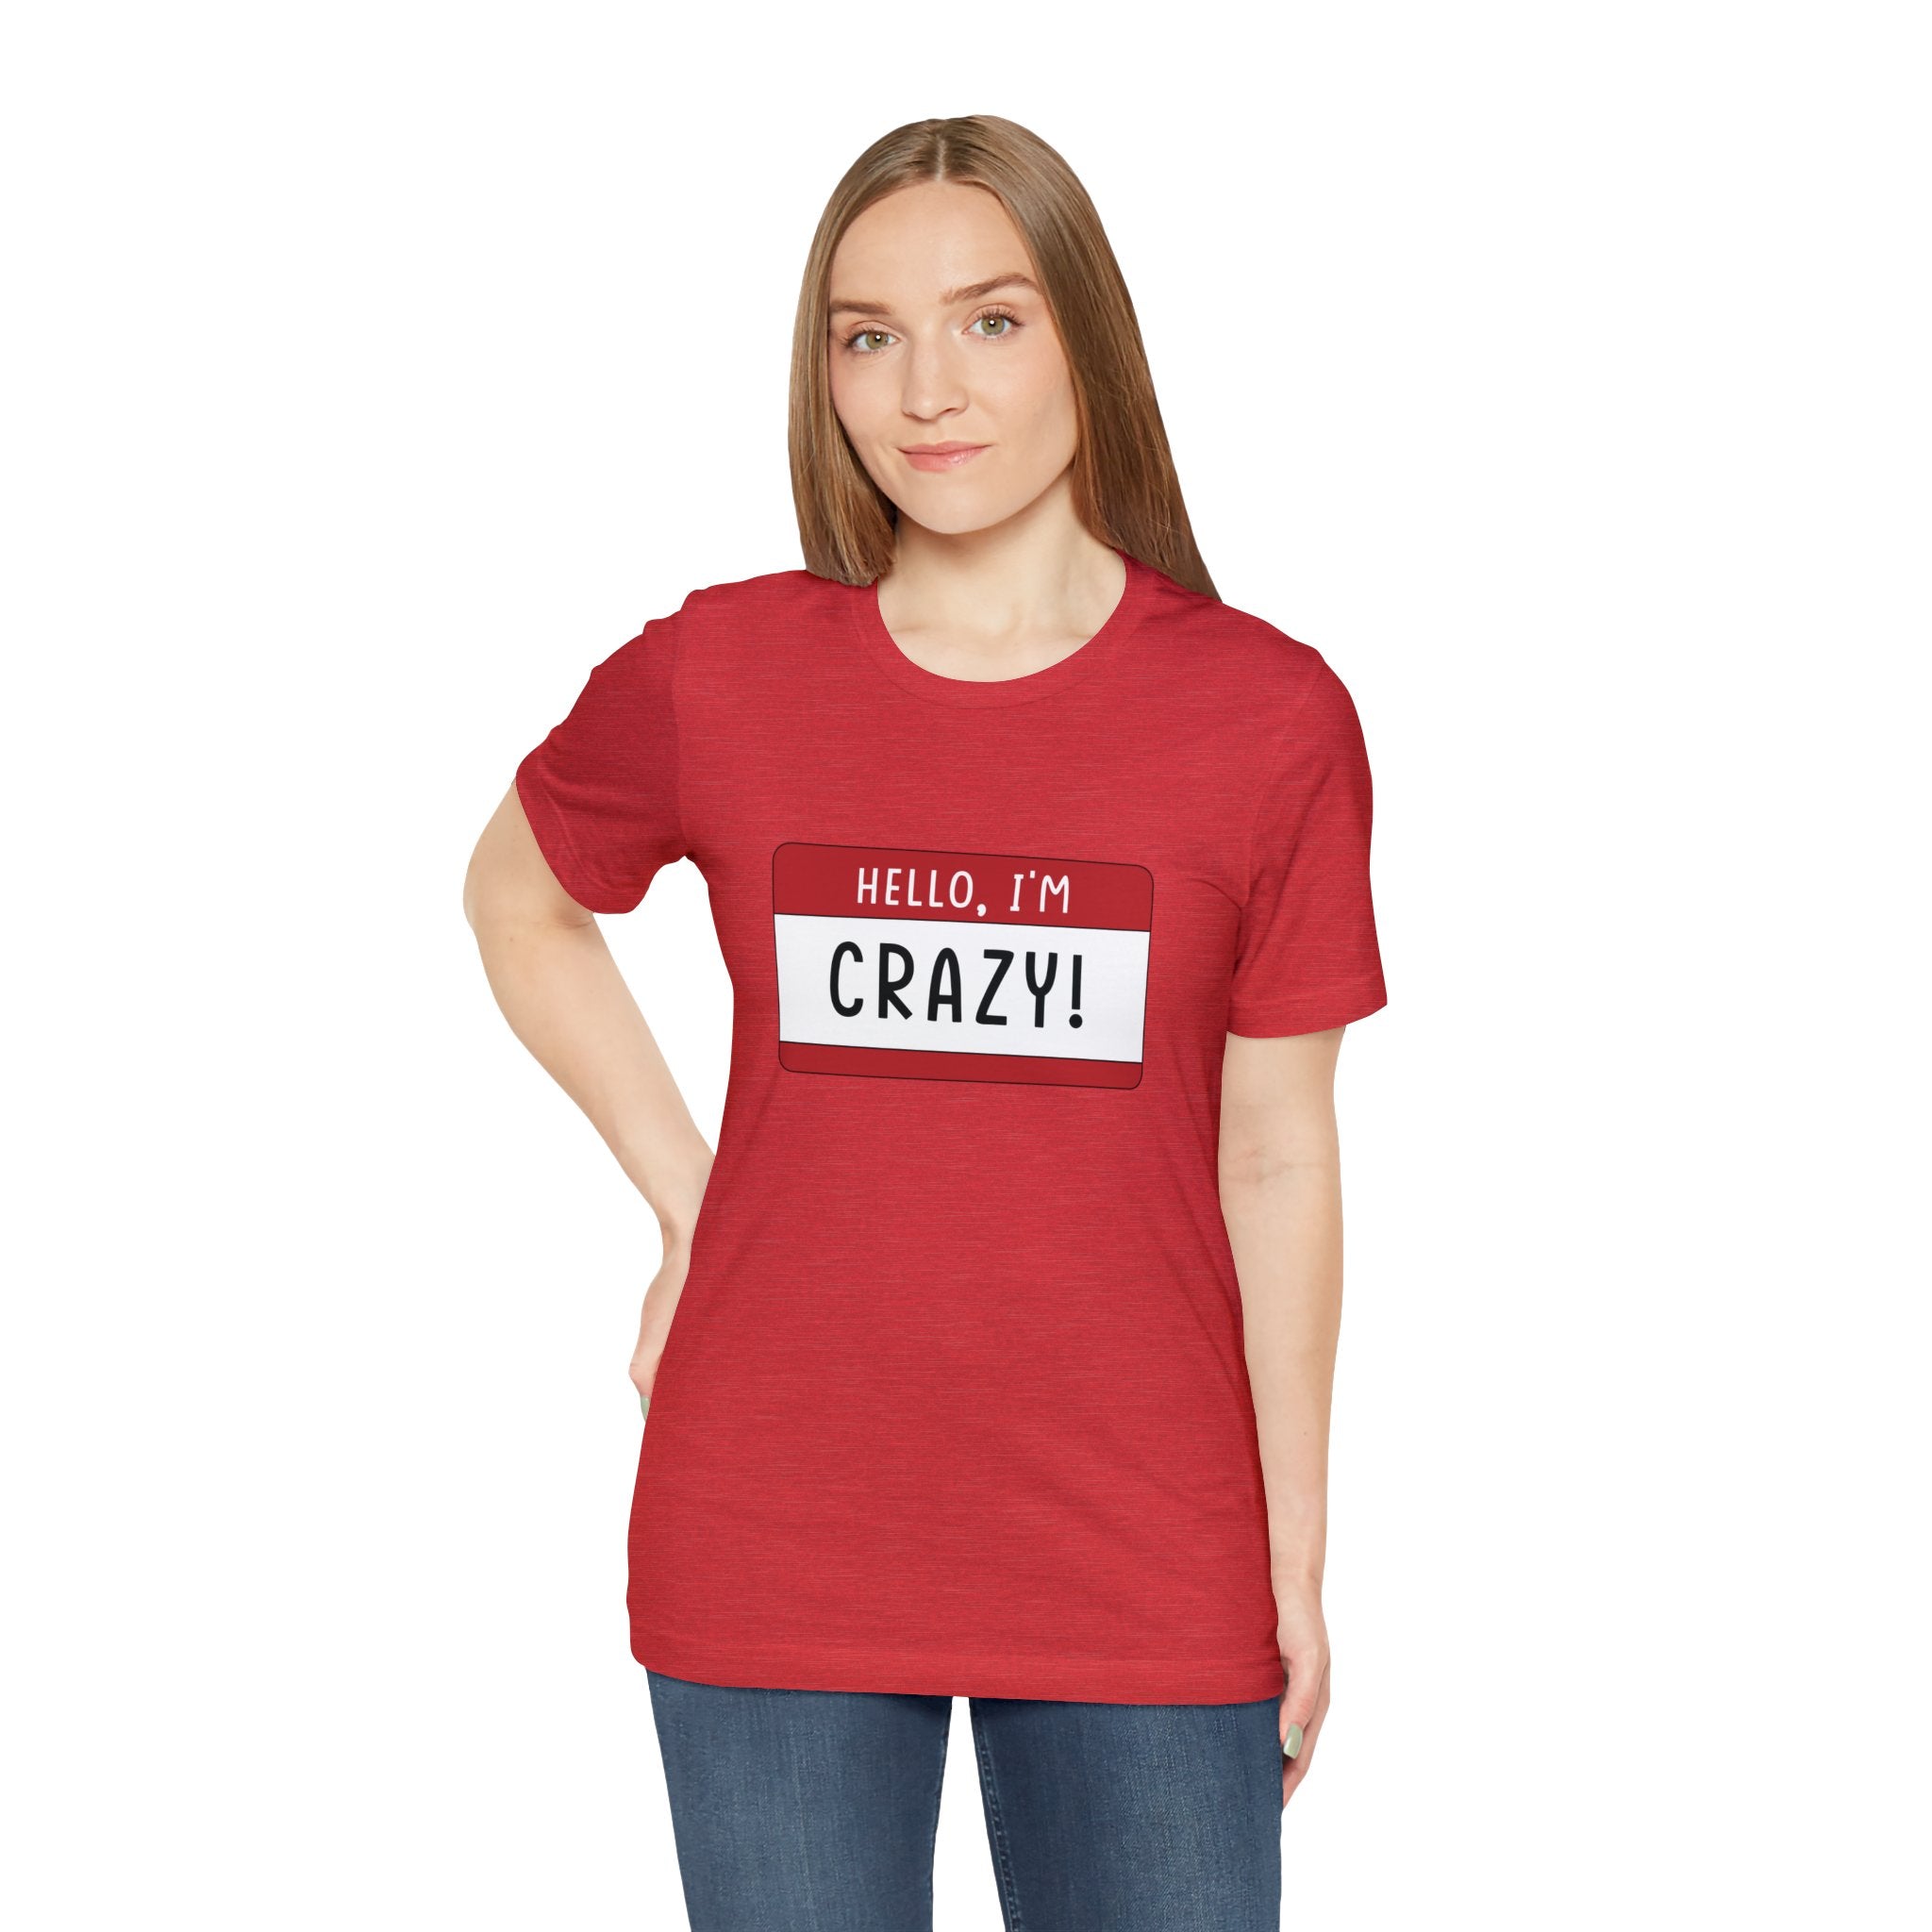 A woman in a red t-shirt with a "Hello, I'm CRAZY T-Shirt" quirky t-shirt stands confidently against a white background.